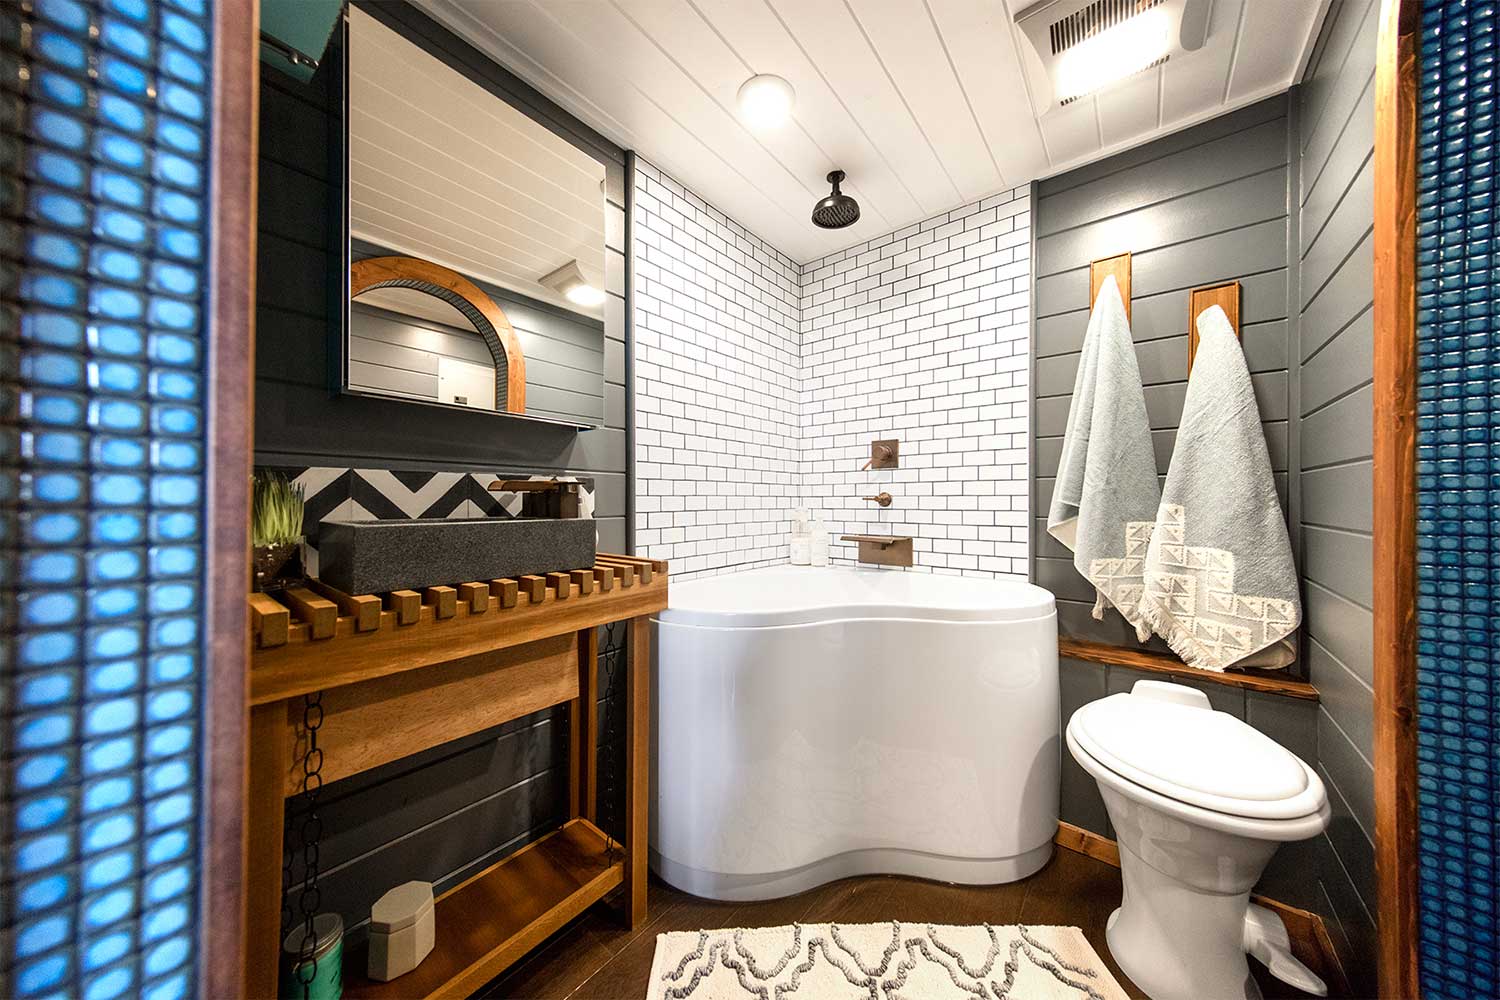 The Tiny Adventure Home's bathroom with tile shower and deep tub